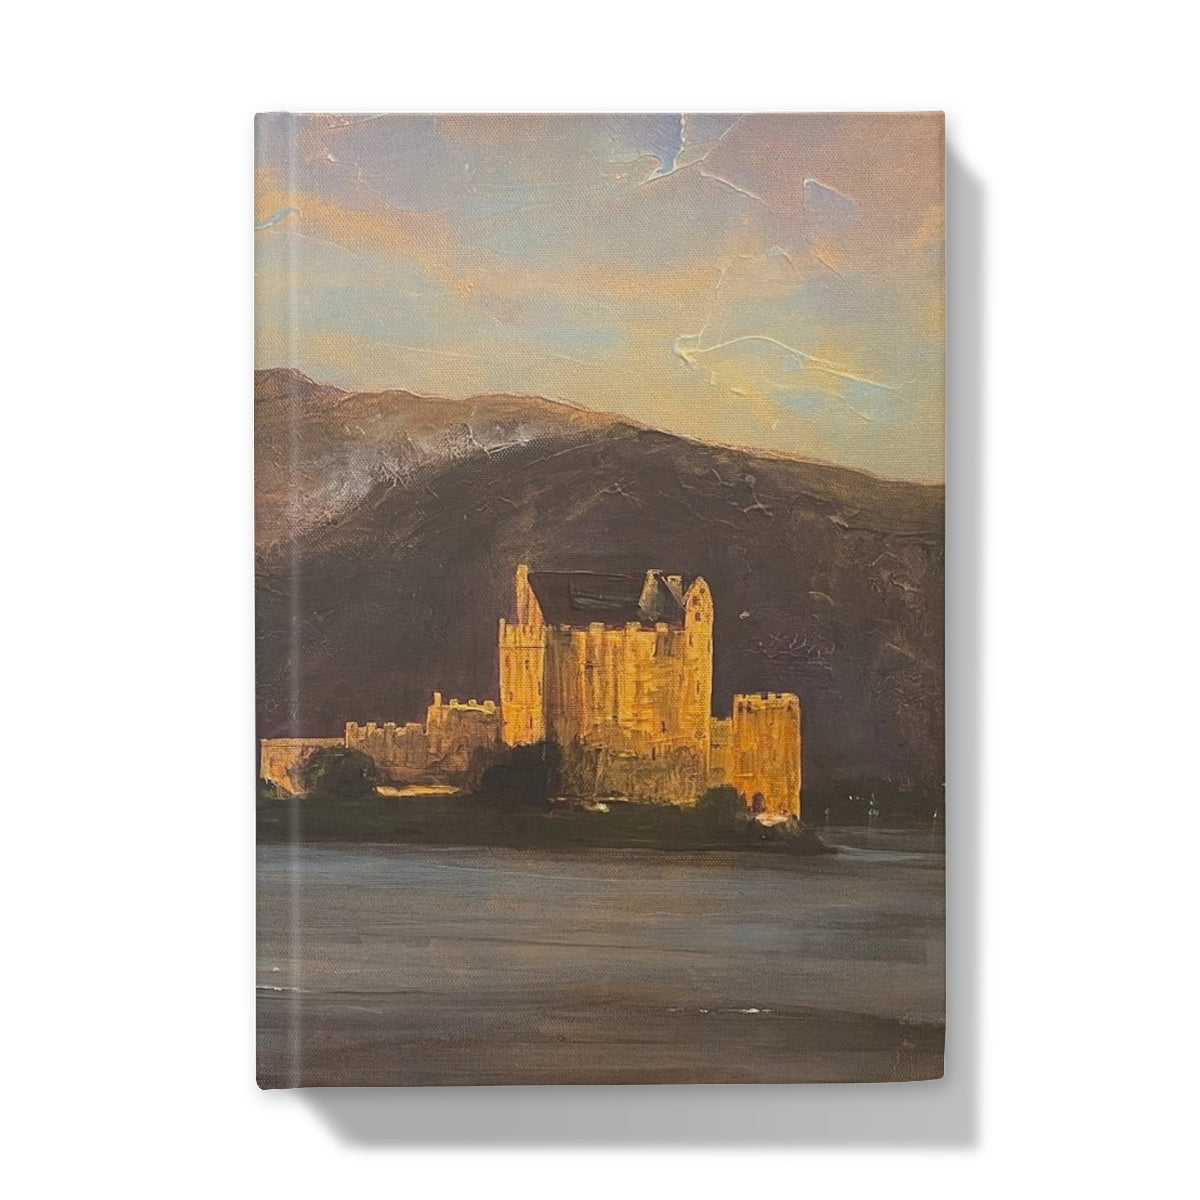 Eilean Donan Castle Art Gifts Hardback Journal-Journals & Notebooks-Historic & Iconic Scotland Art Gallery-A5-Plain-Paintings, Prints, Homeware, Art Gifts From Scotland By Scottish Artist Kevin Hunter